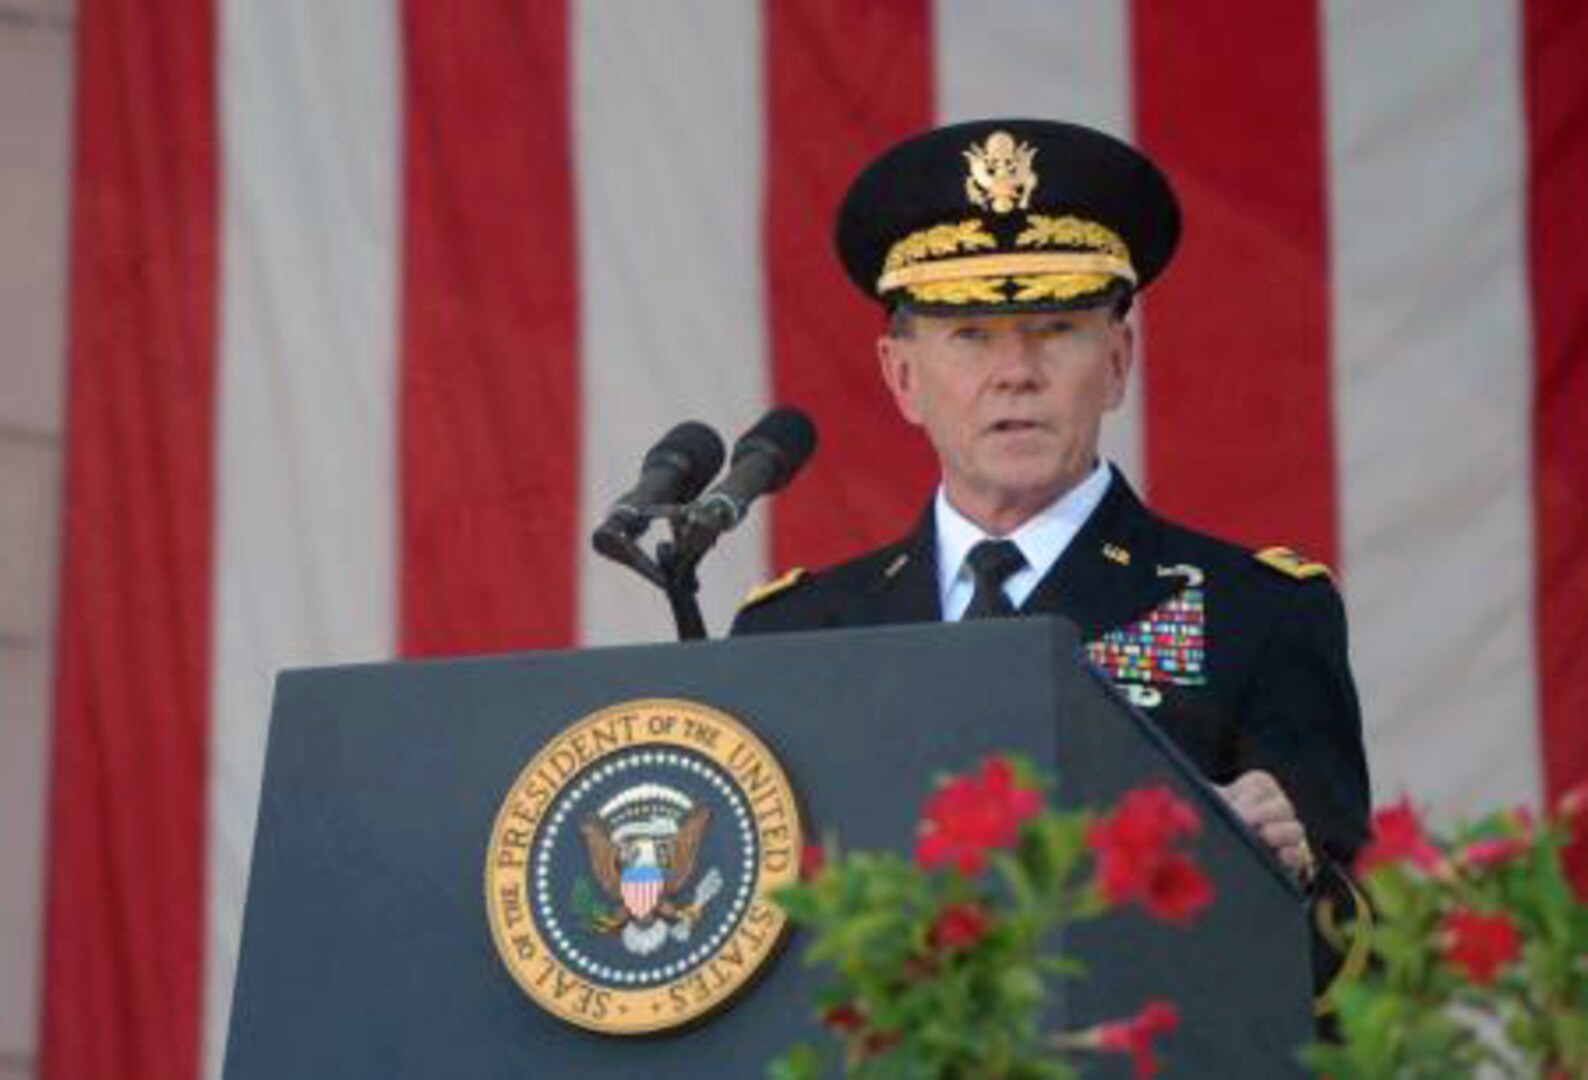 Chairman of the Joint Chiefs of Staff Army Gen. Martin E. Dempsey speaks during a Memorial Day ceremony May 28, 2012.